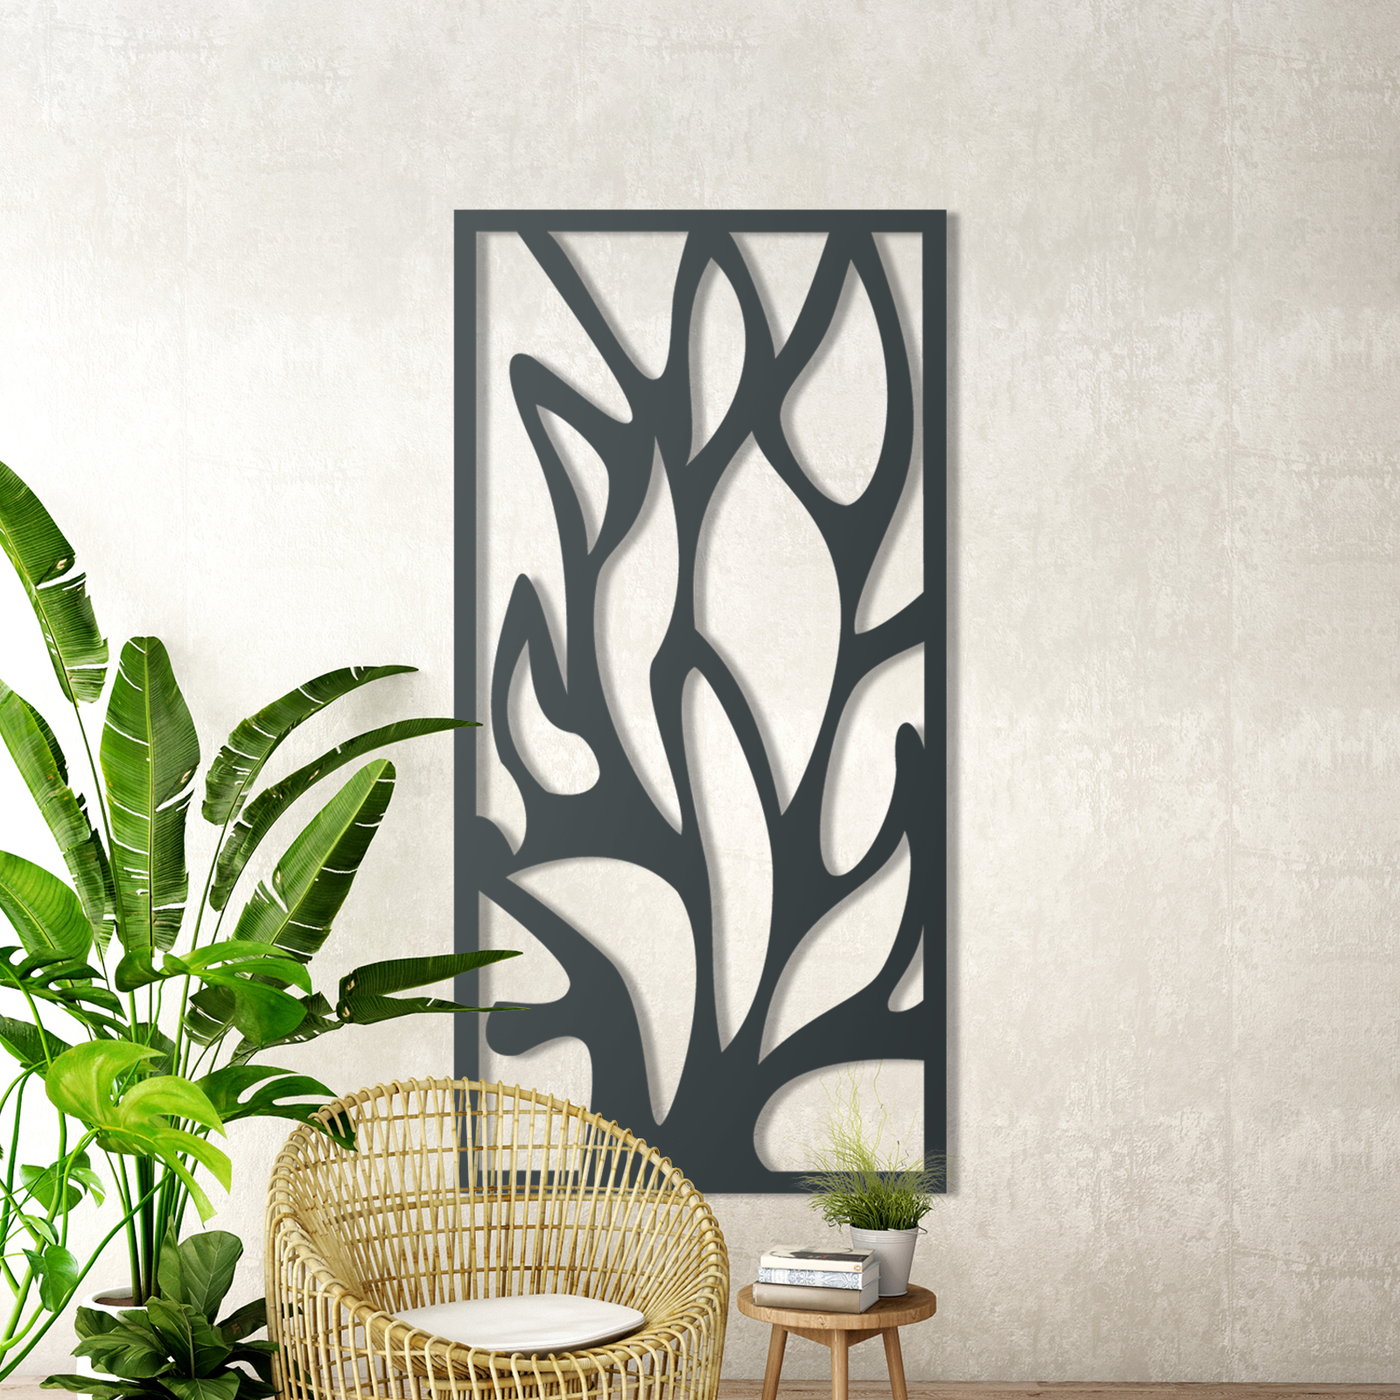 Water Reflection Metal Screen: The Perfect Way to Keep Your Garden Private and Stylish